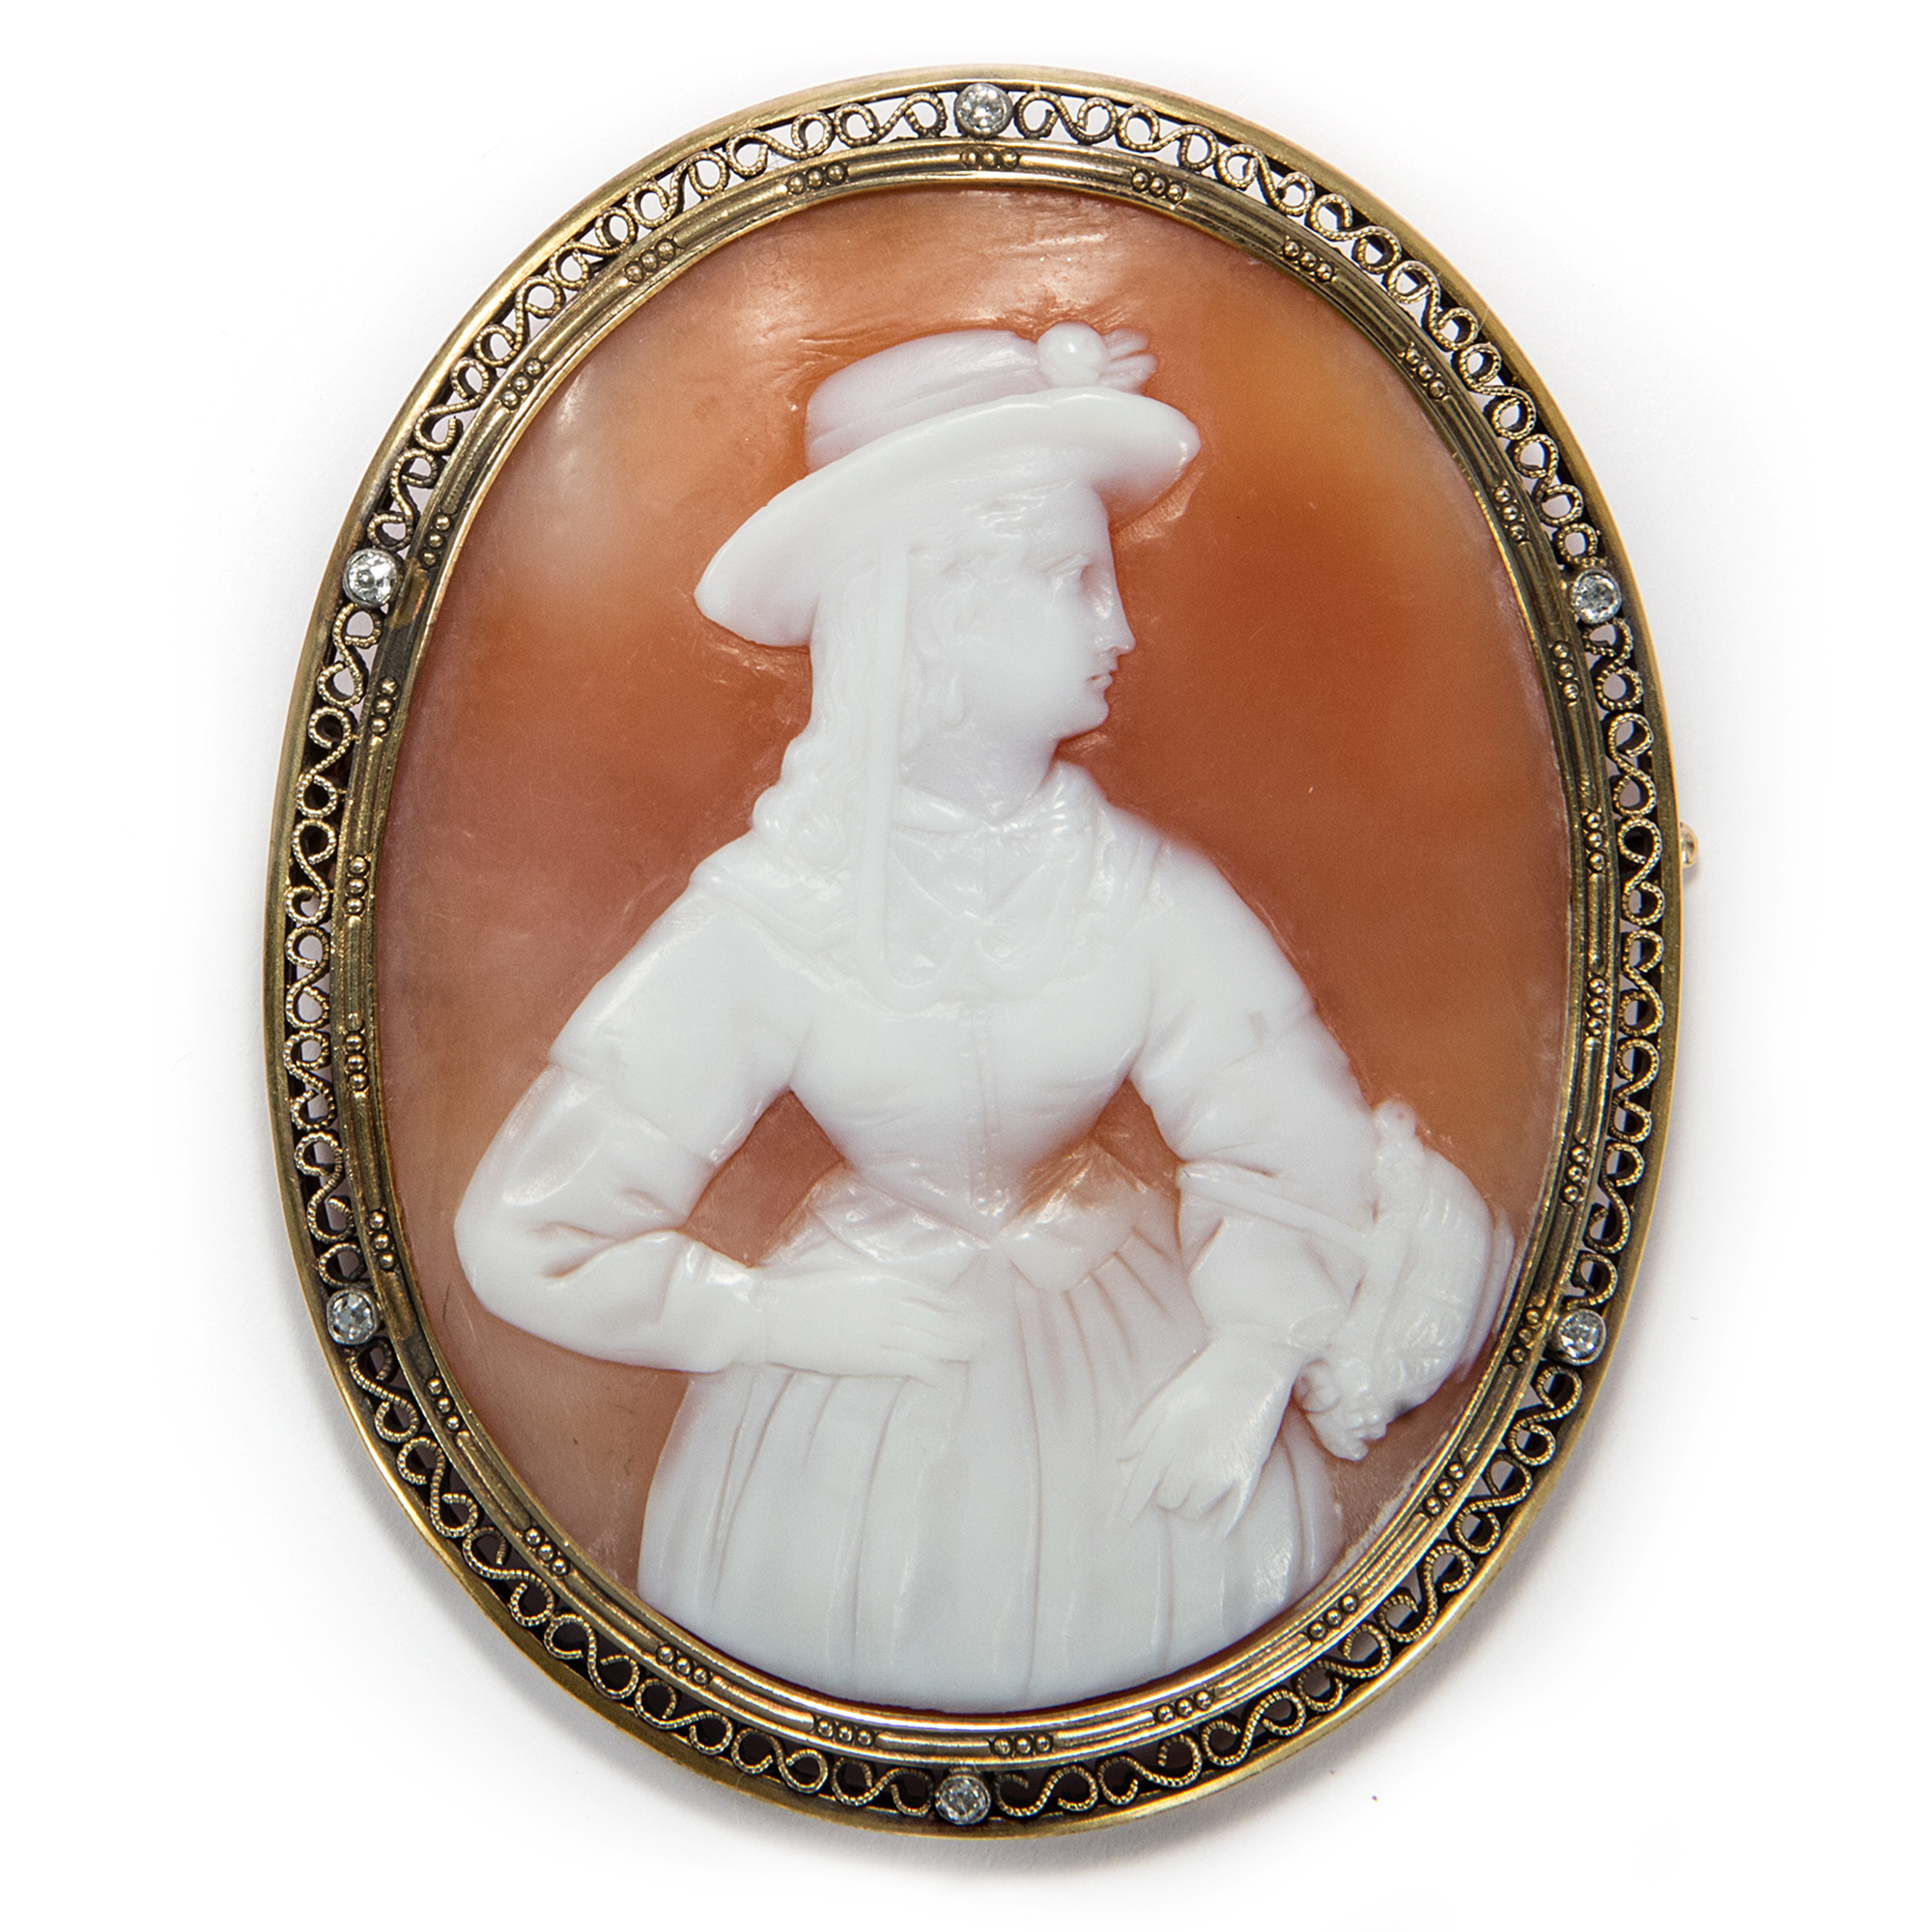 Brooch with shell cameo, gold setting & diamonds, Naples ca. 1870